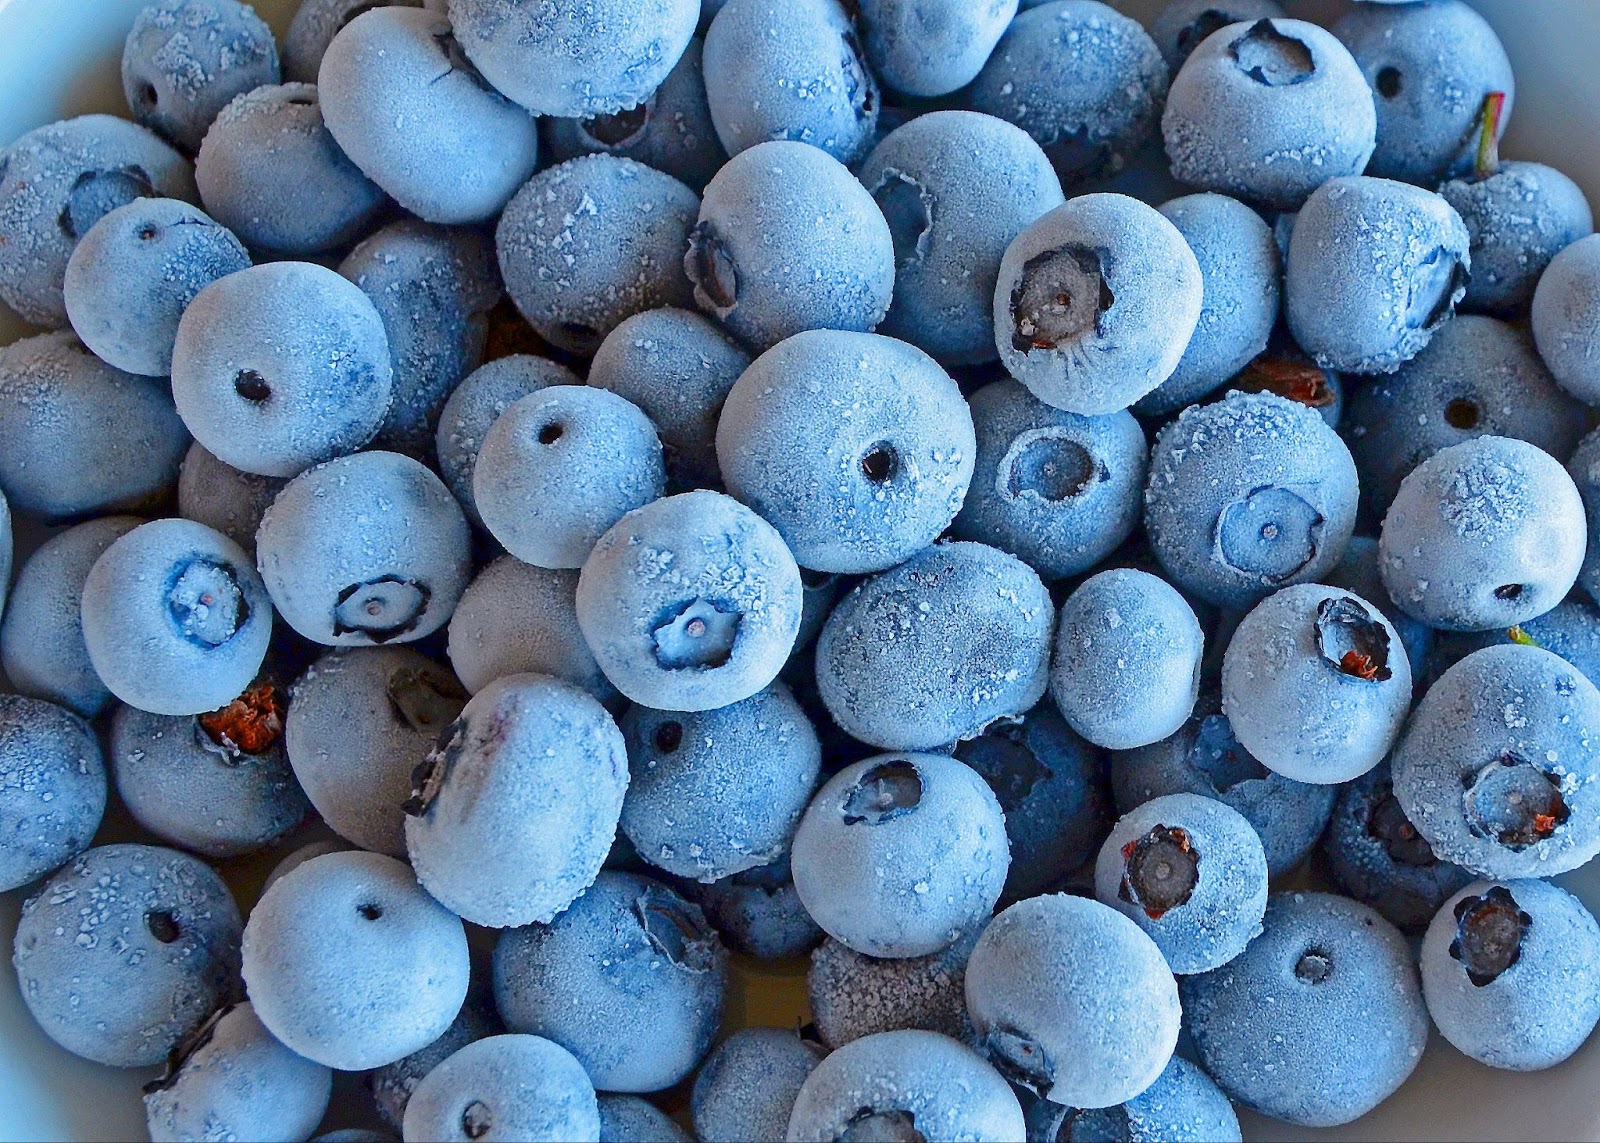 ideal packaging for frozen blueberries